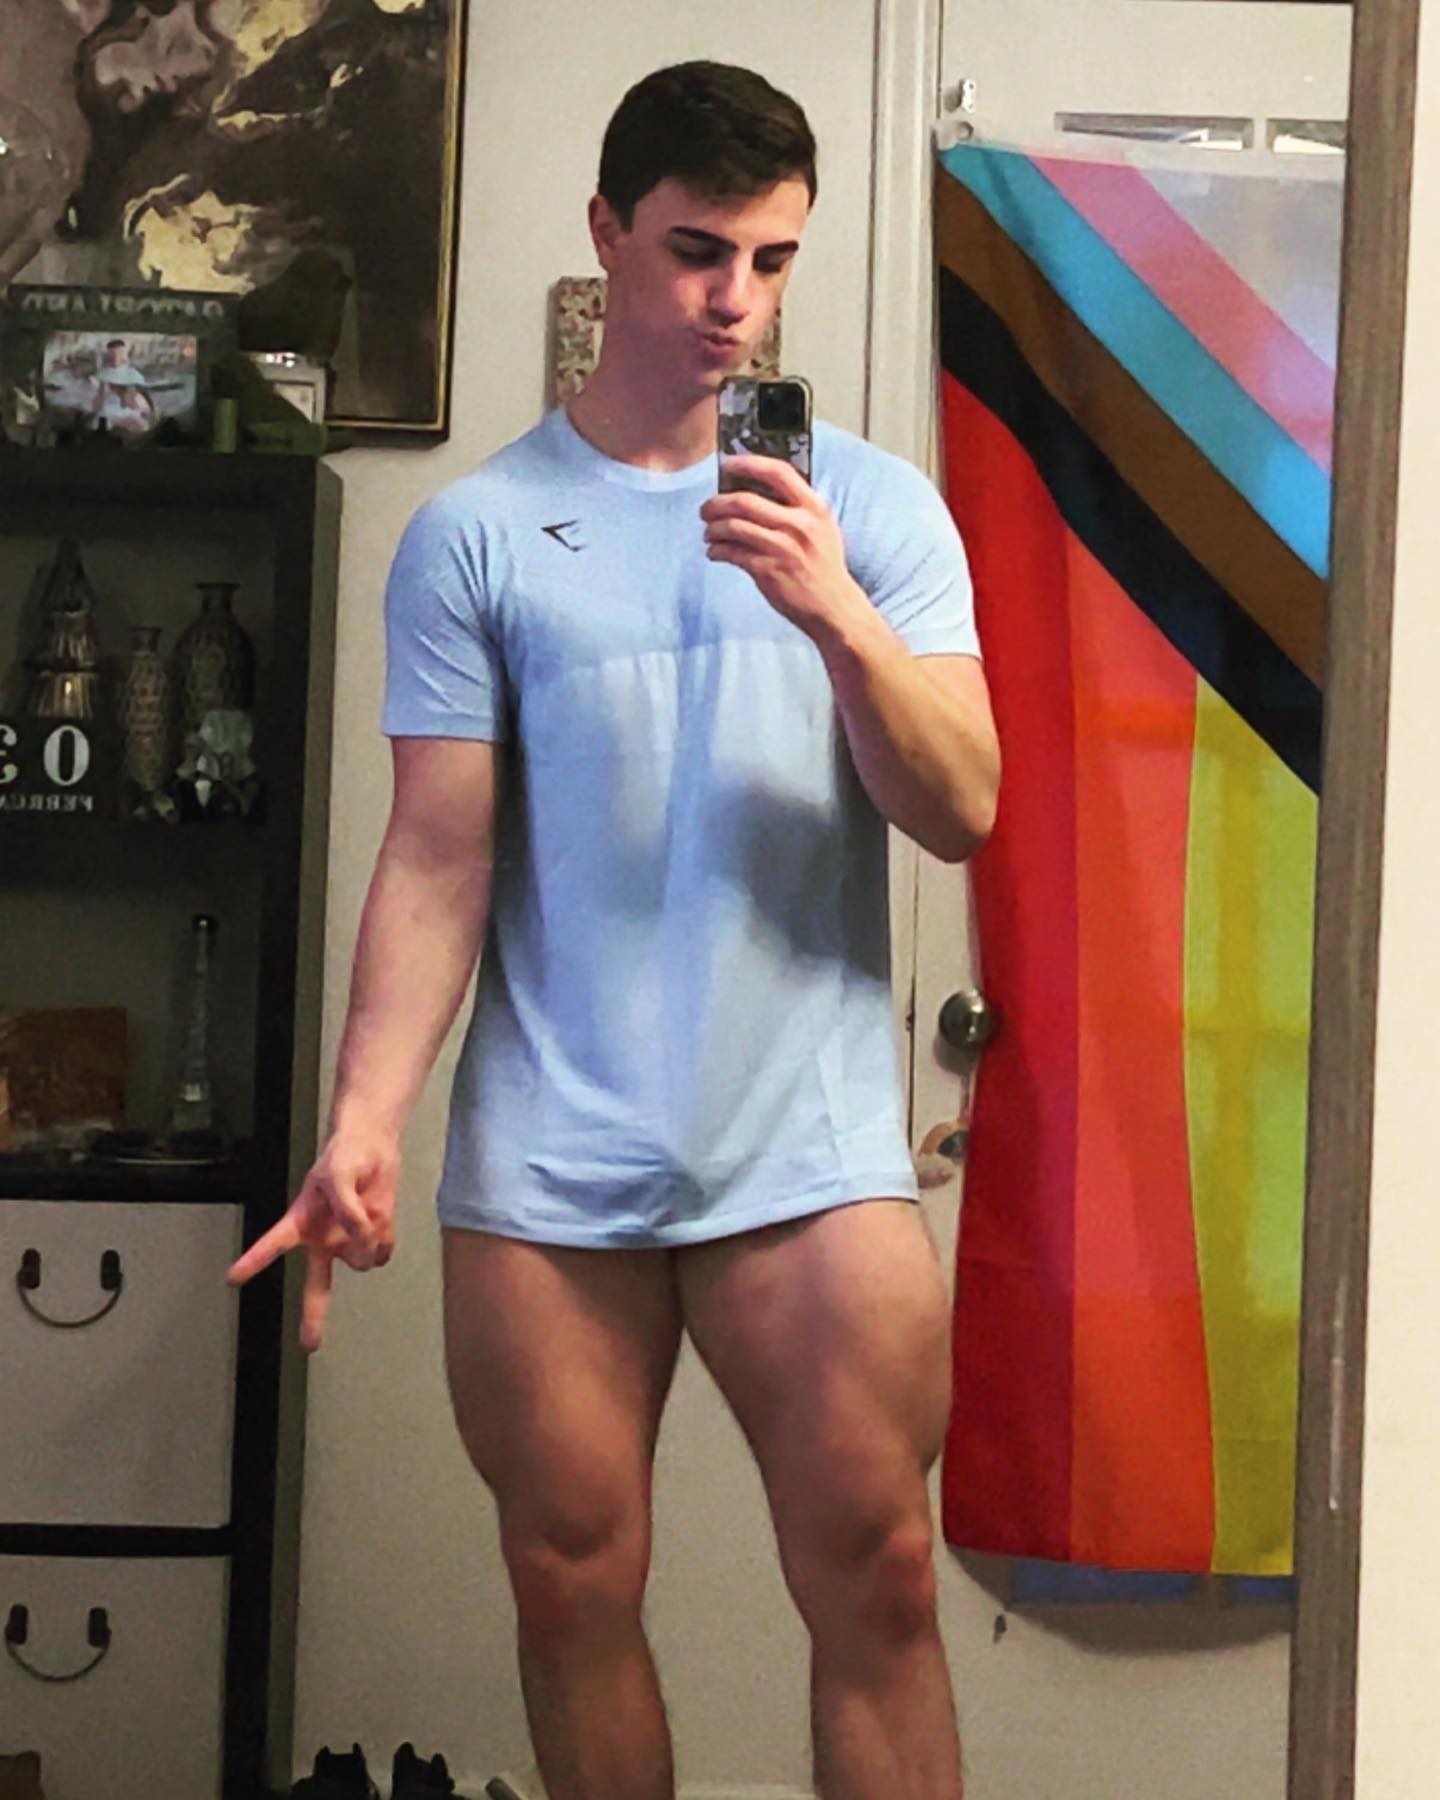 The legs are legging 

#legs #muscle #thick #thicc #thiccthighs #body #bodypositivity #pride #gay #gayboy #gaymen #gymshark